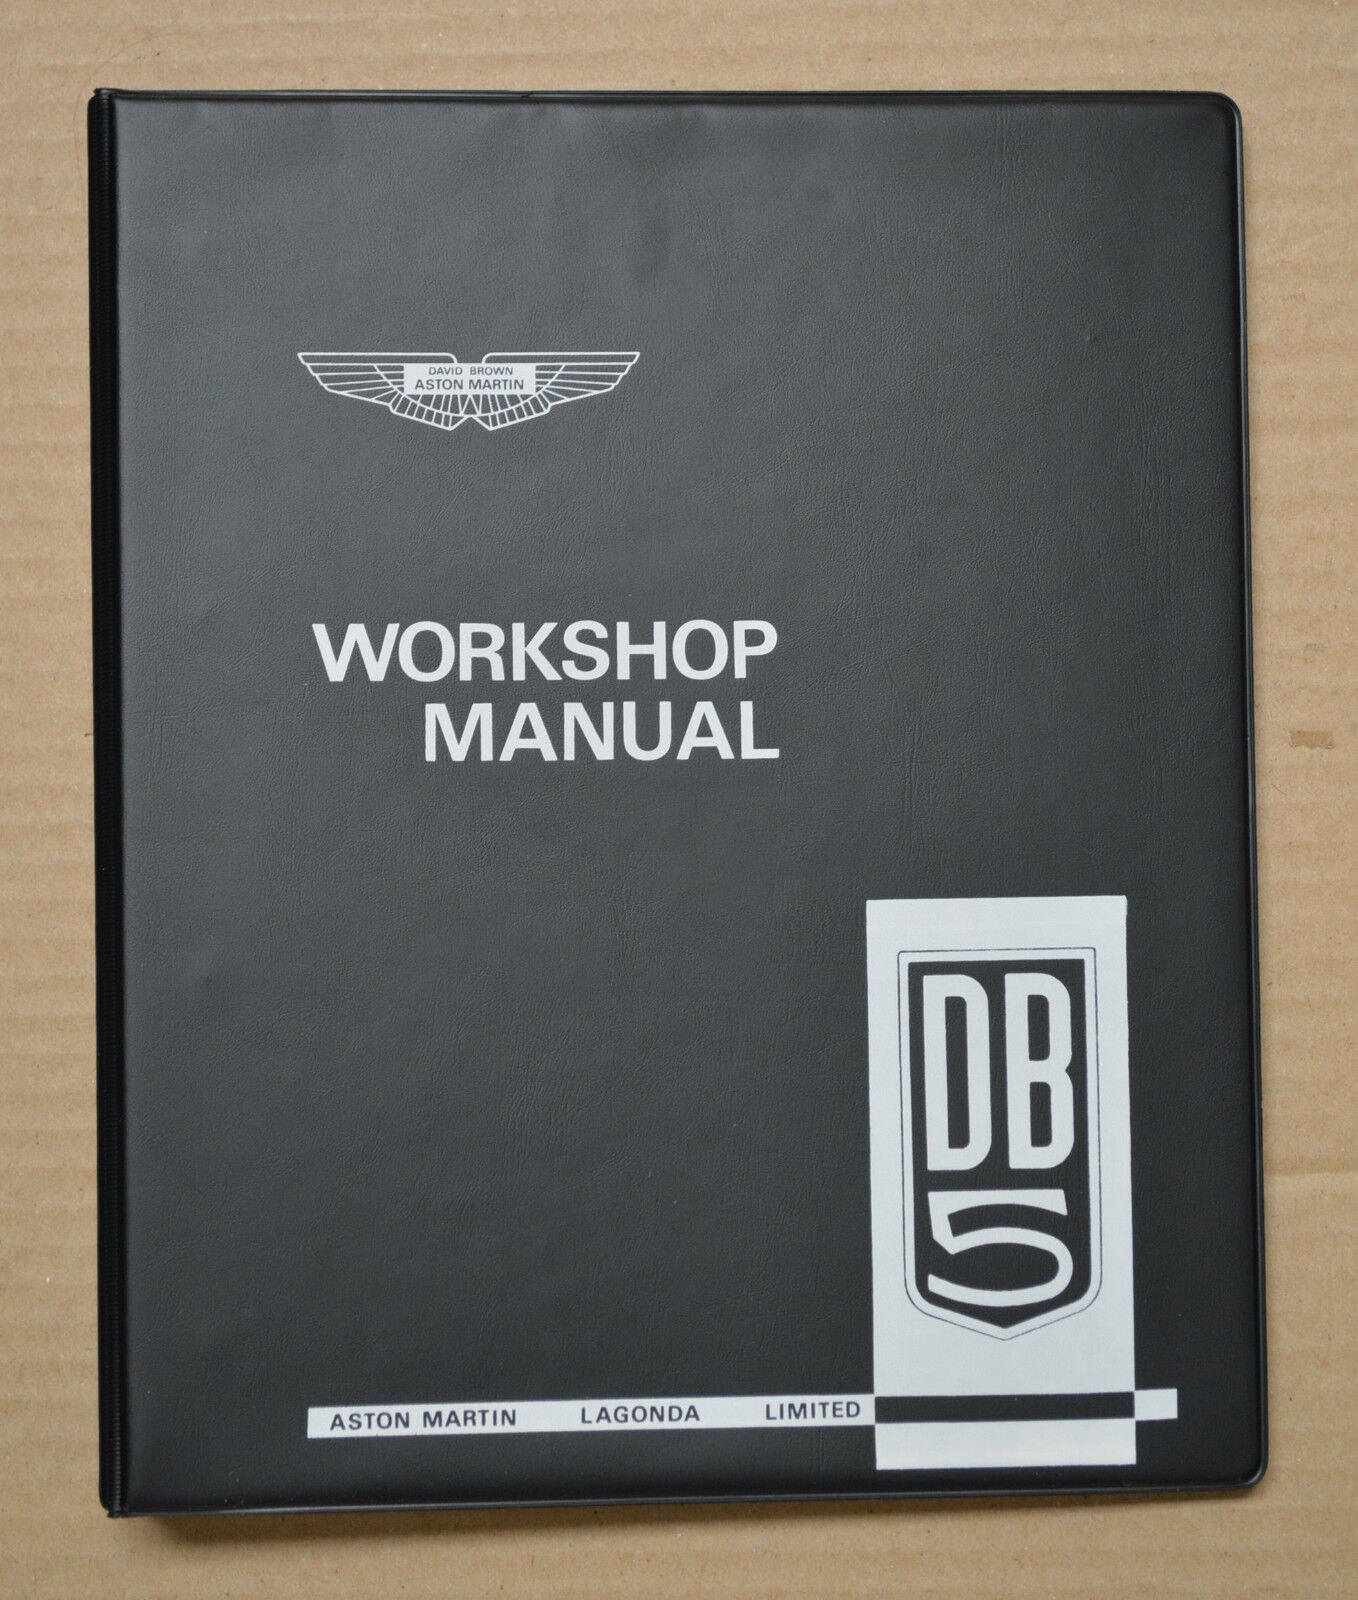 ASTON MARTIN DB5 WORKSHOP MANUAL FACTORY ISSUE BRAND NEW